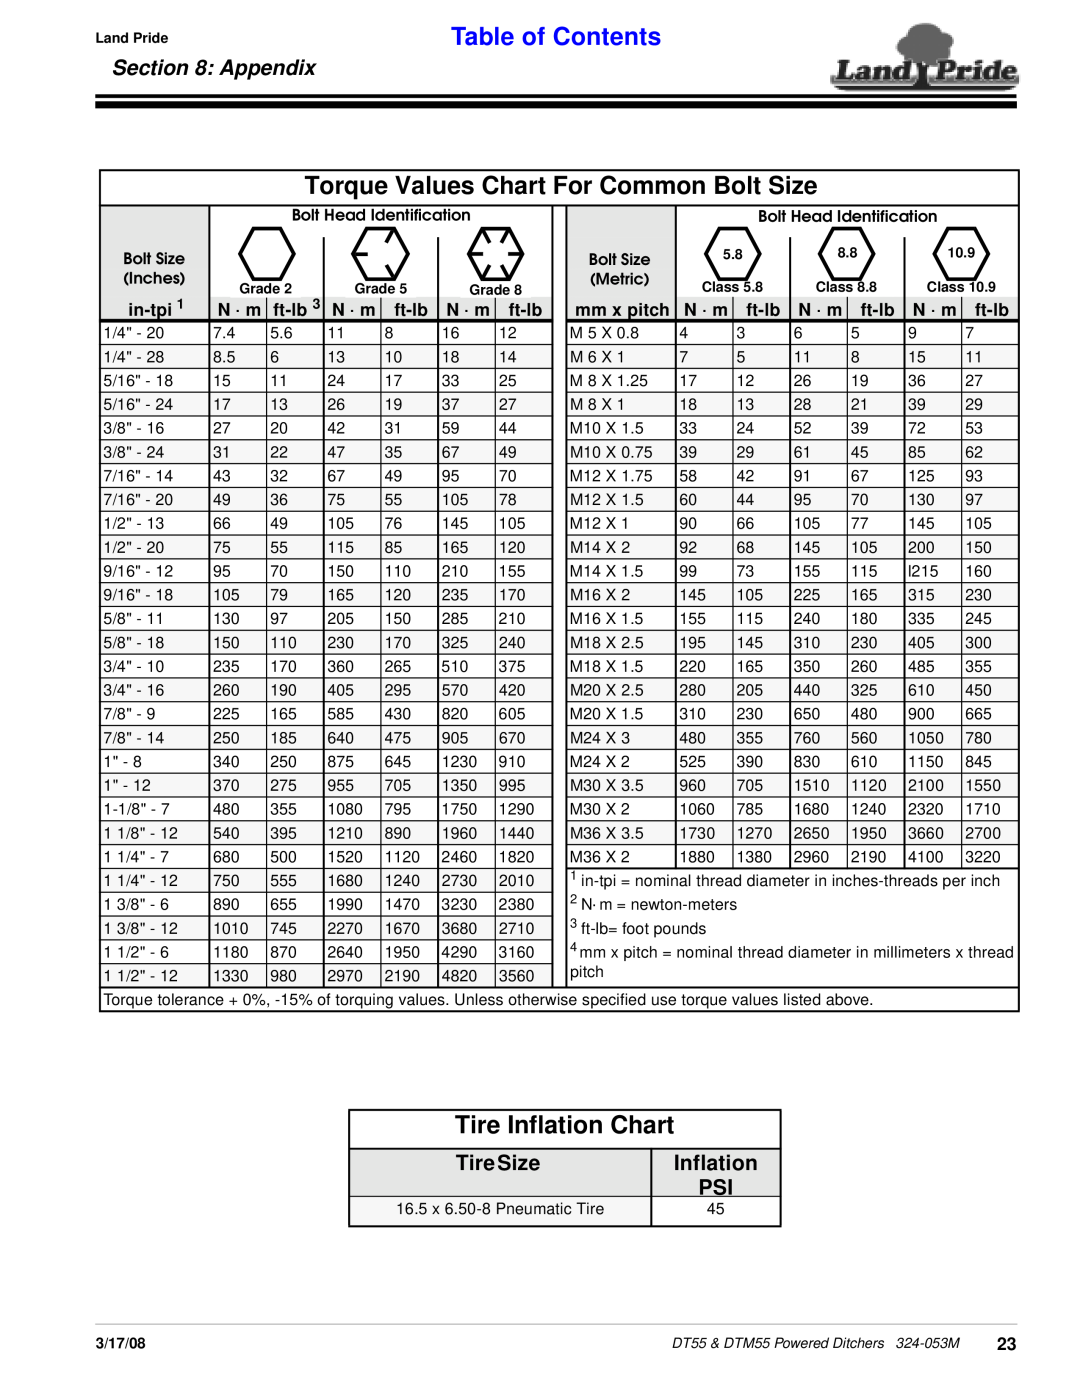 Land Pride DT55 Torque Values Chart For Common Bolt Size, Tire Inflation Chart, Appendix, Table of Contents, in-tpi, N · m 